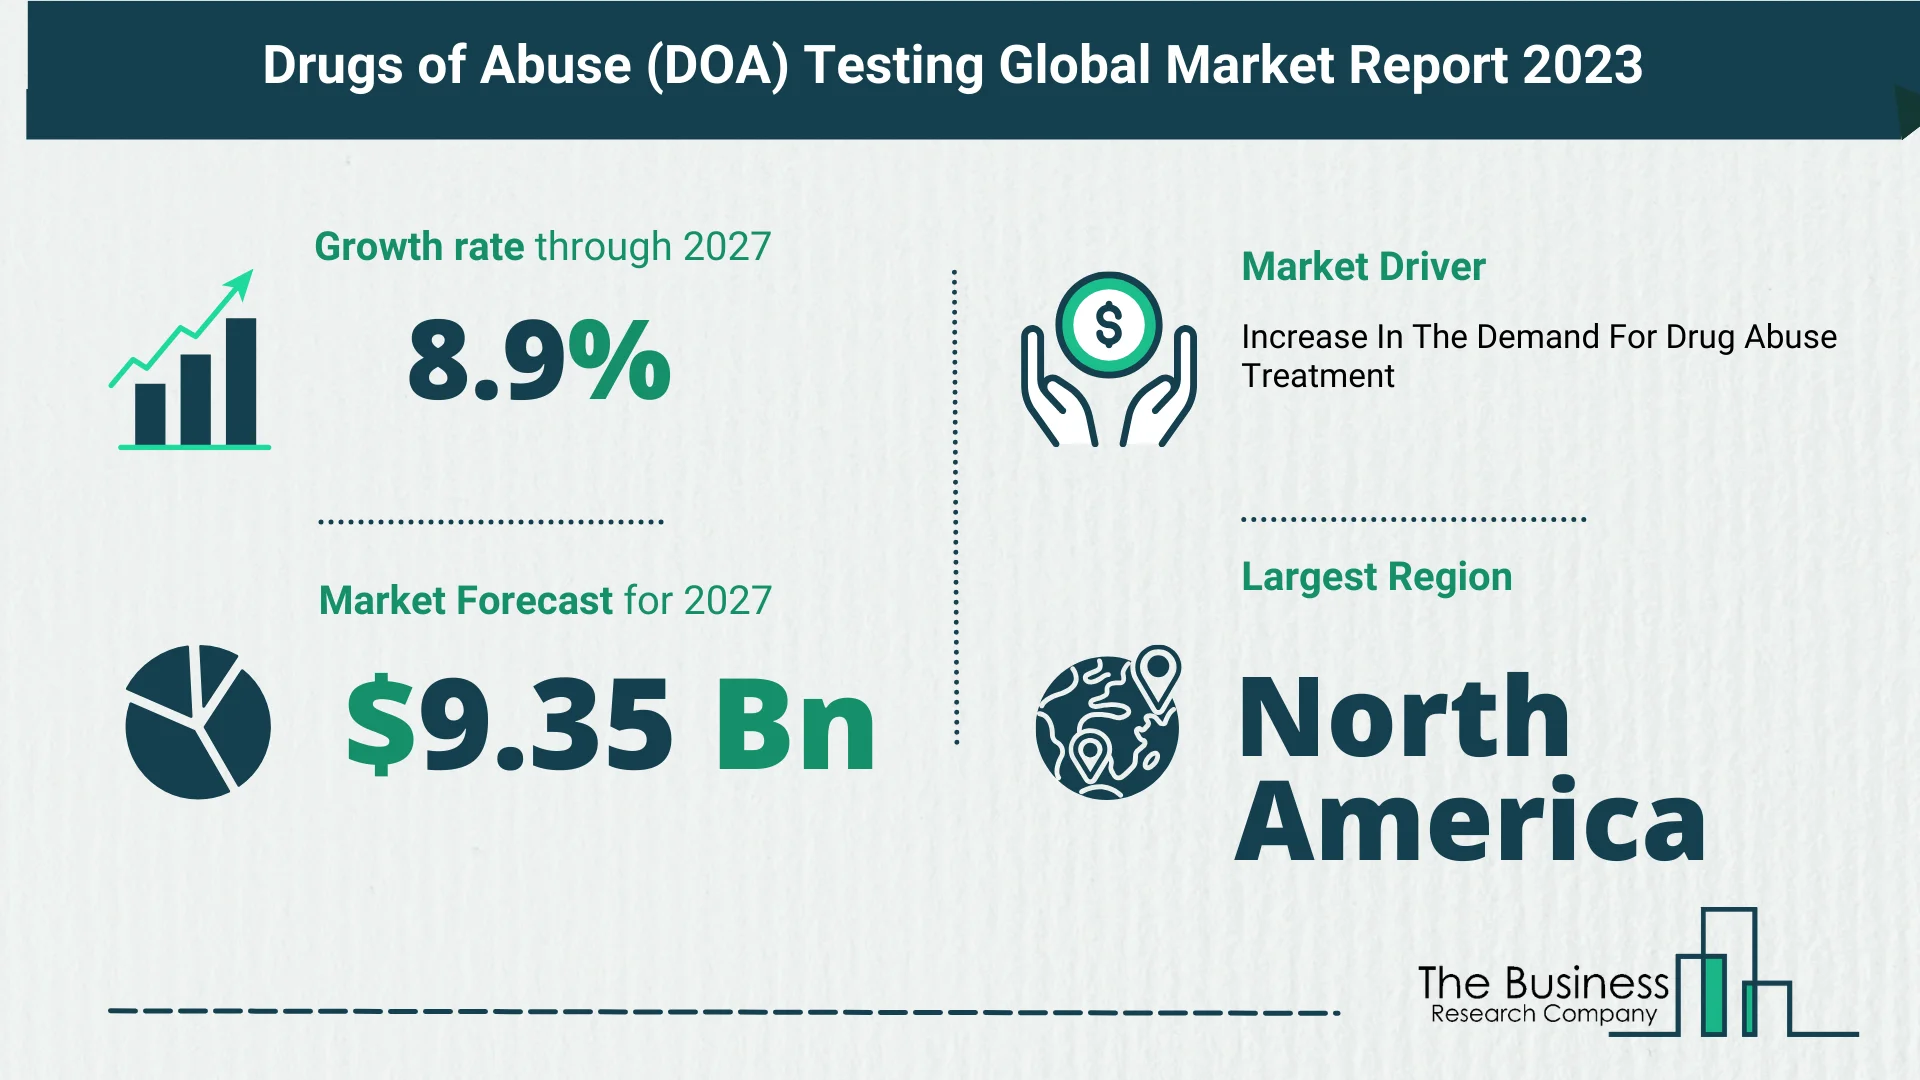 5 Key Insights On The Drugs of Abuse (DOA) Testing Market 2023